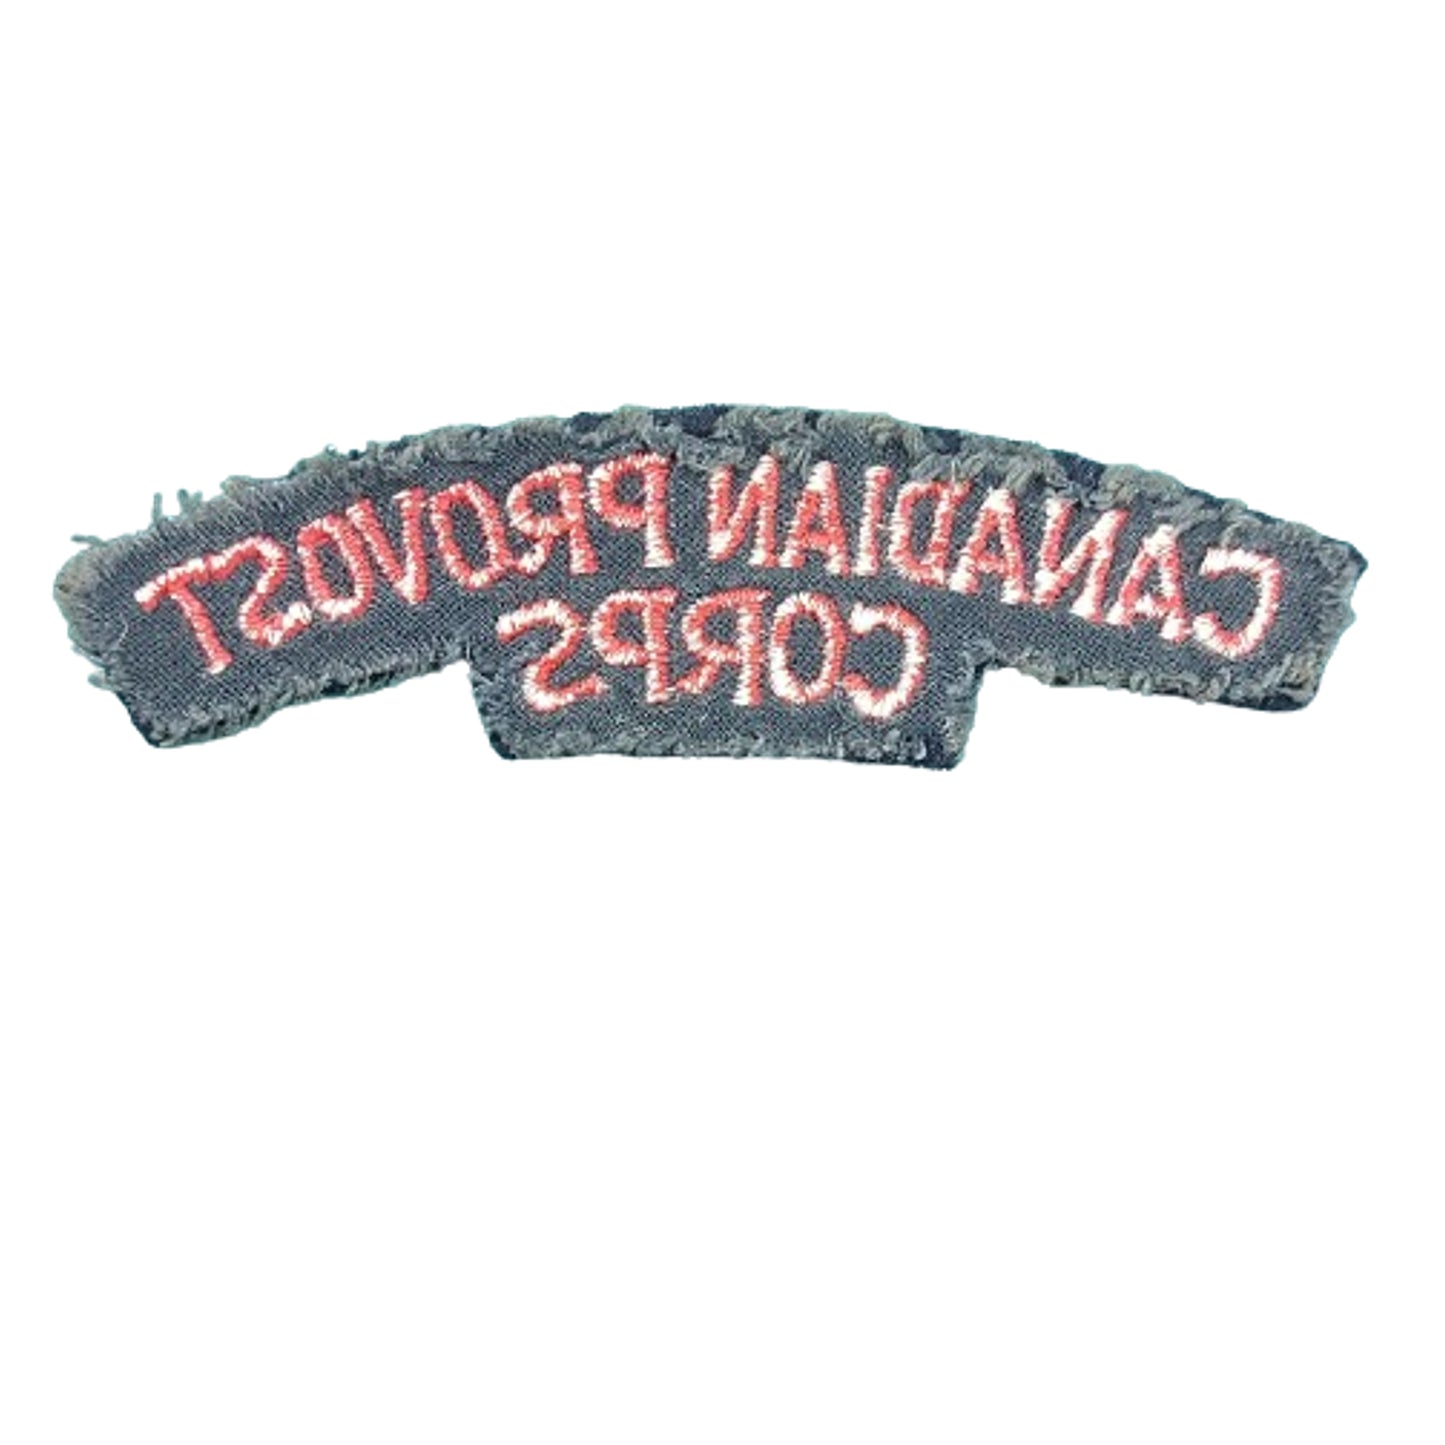 WW2 Canadian Provost Corps Shoulder Title